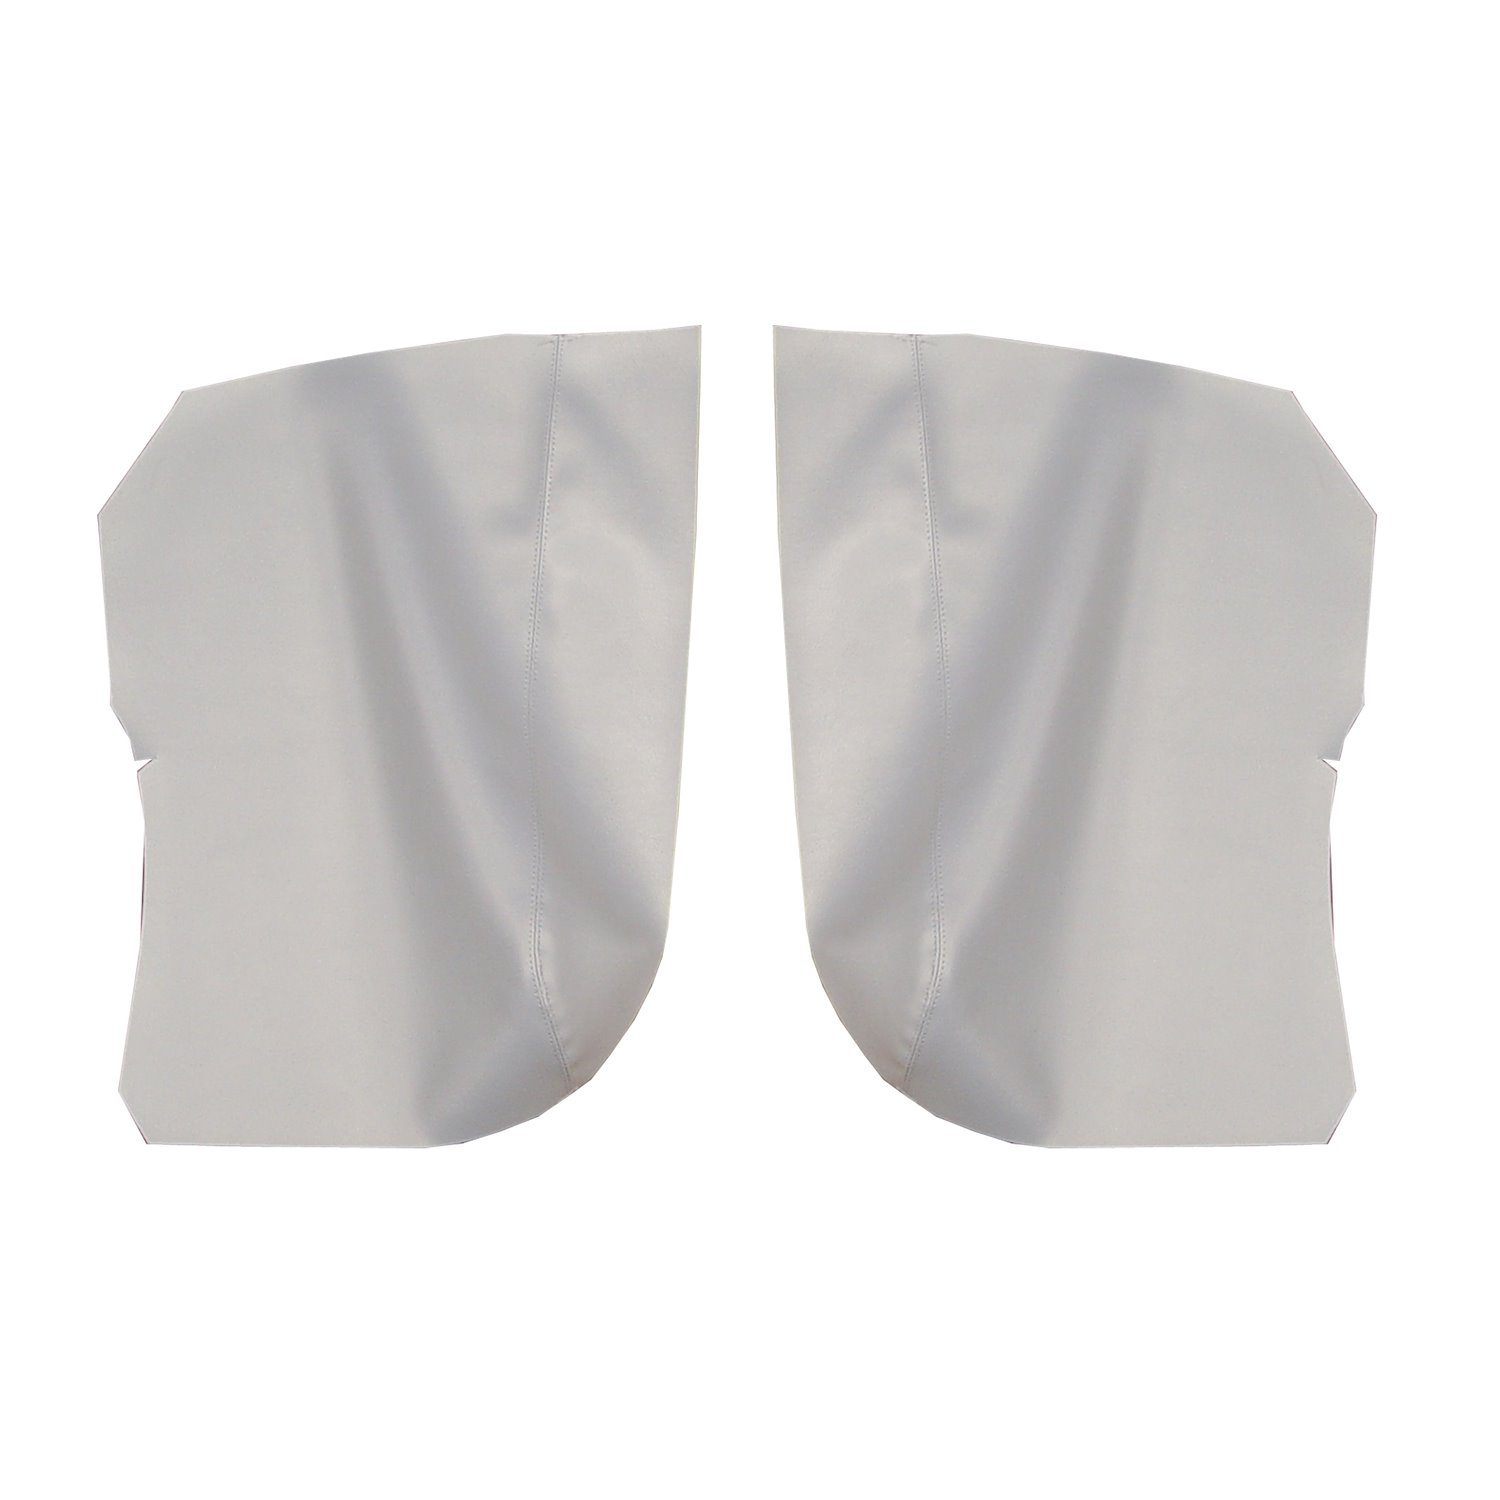 AW68GA00048202G 68/72 GM A-BODY HTP ARMREST COVERS - PEARL WHITE